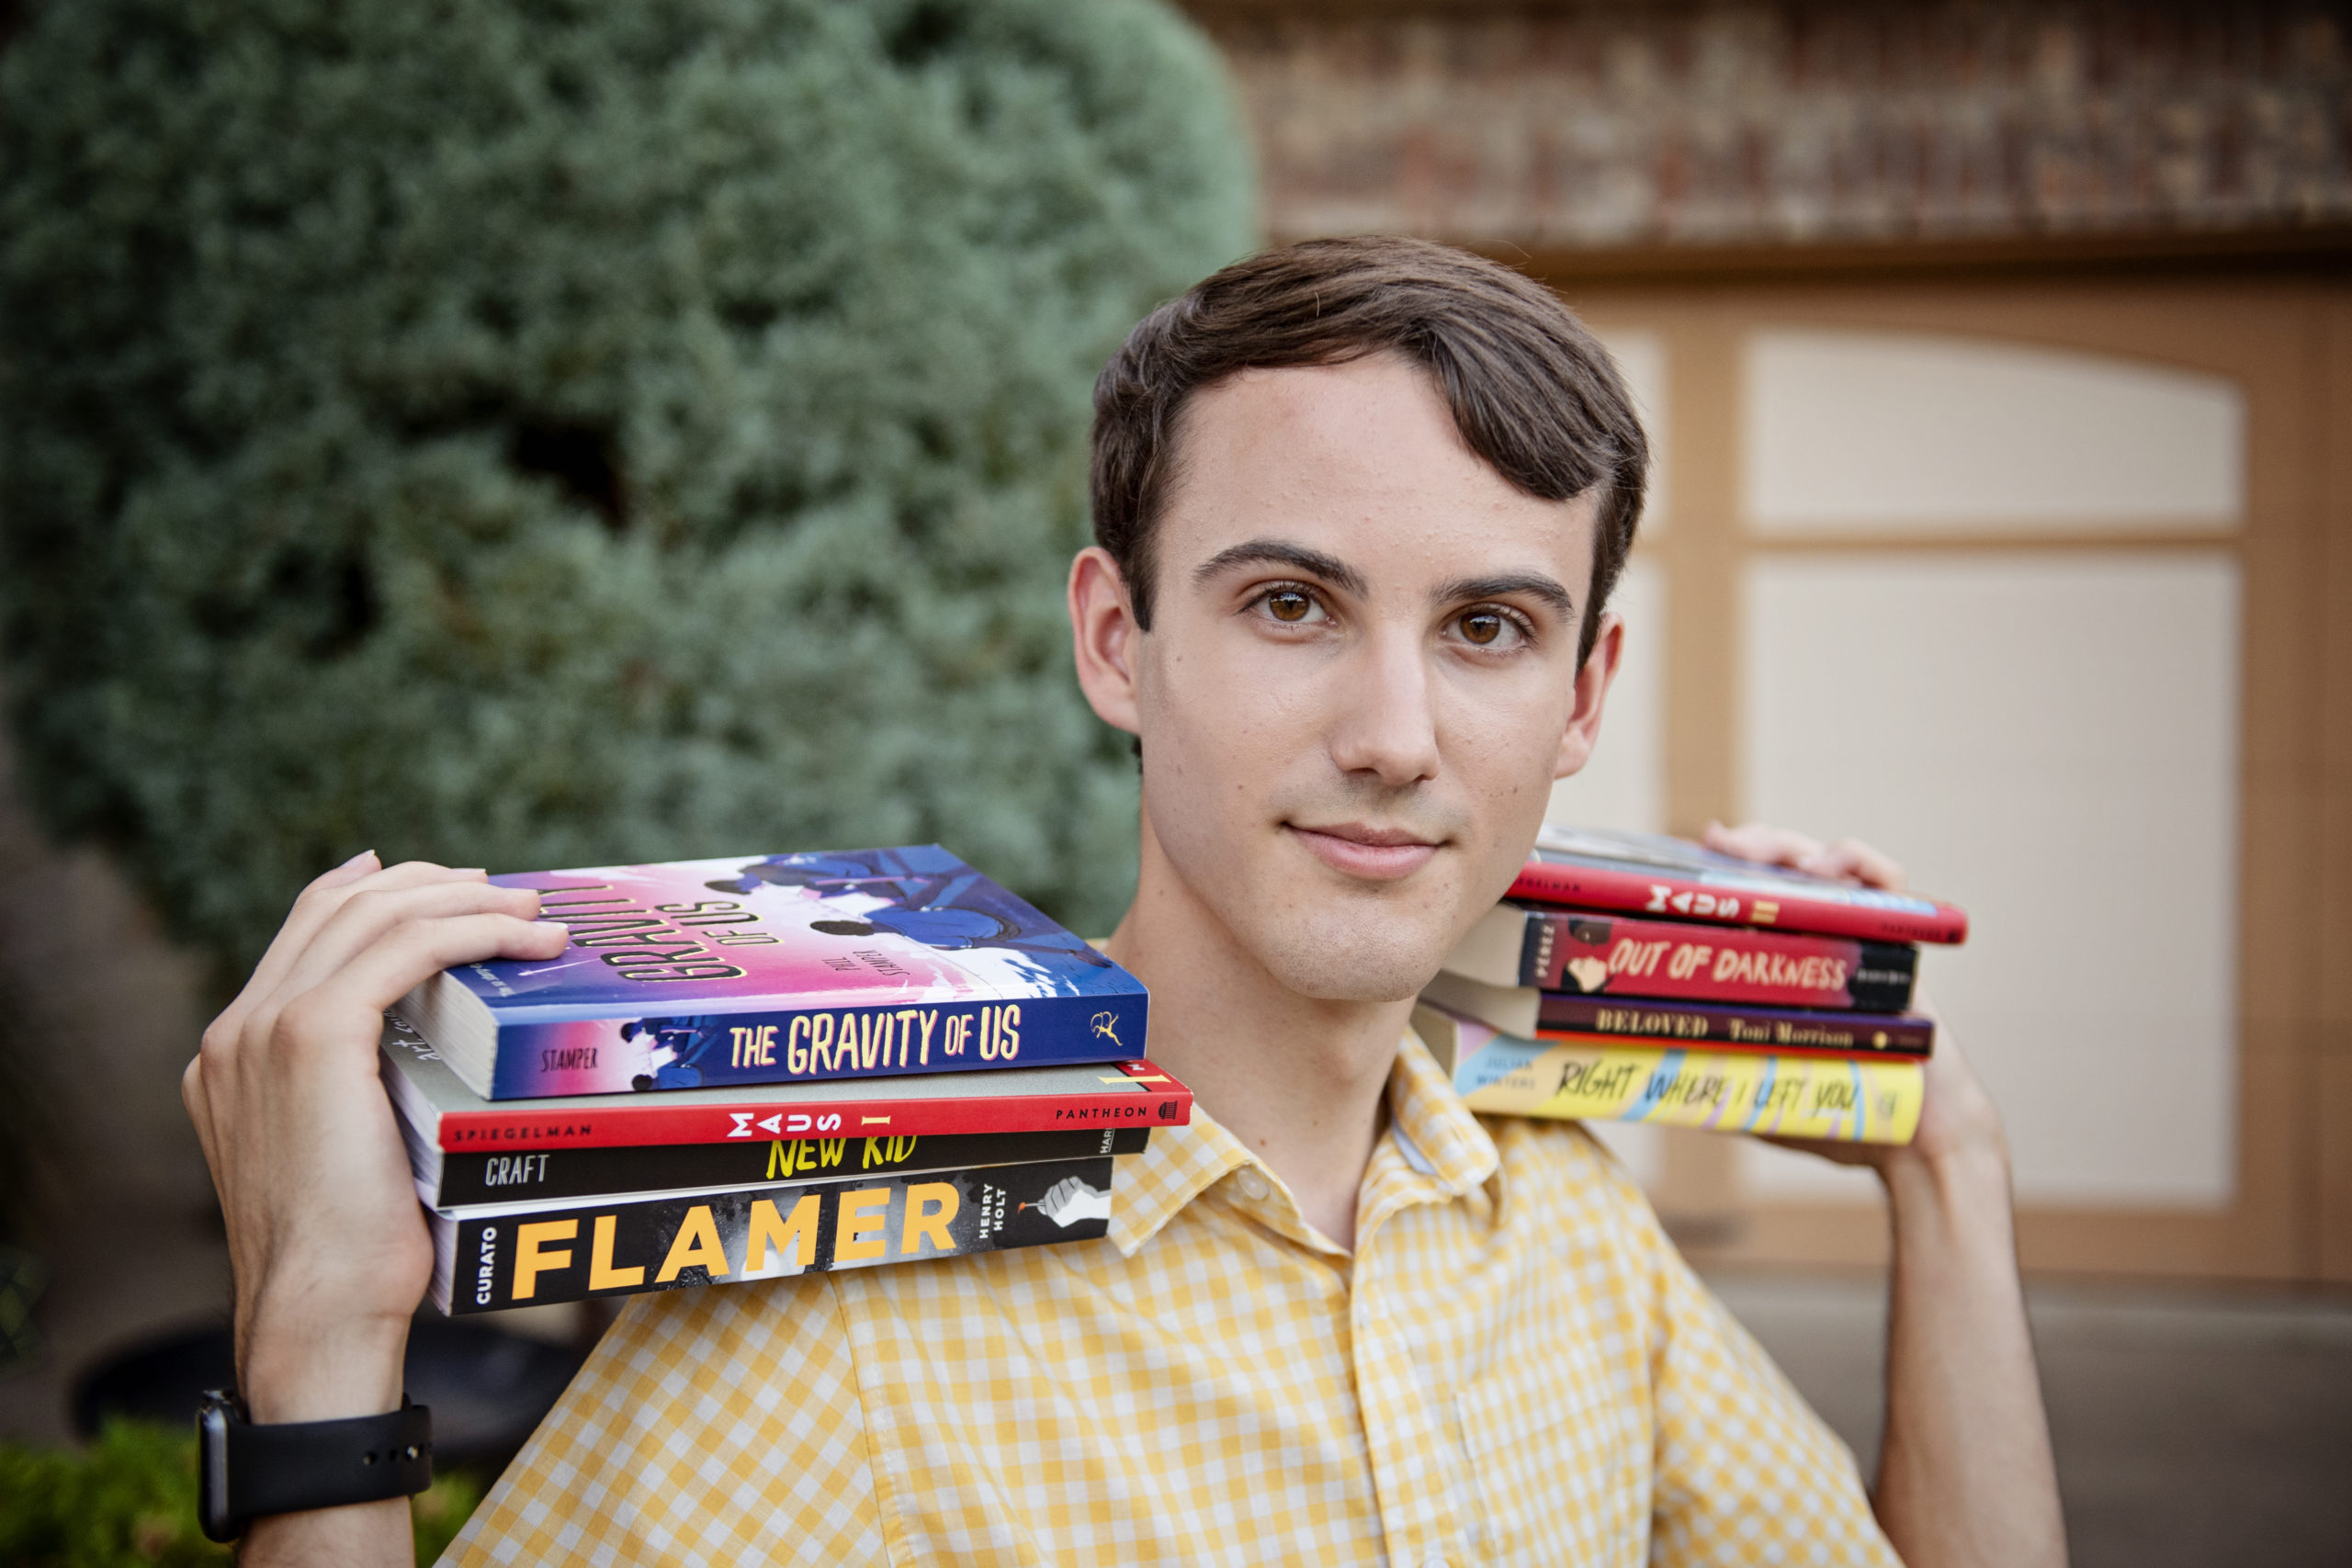 Cameron is a white person with short brown hair , wearing a button down yellow shirt, and holding two armfuls of books on their shoulders, including "The Gravity of Us," "Maus," "Flamer" and other victims of Texas book bans.